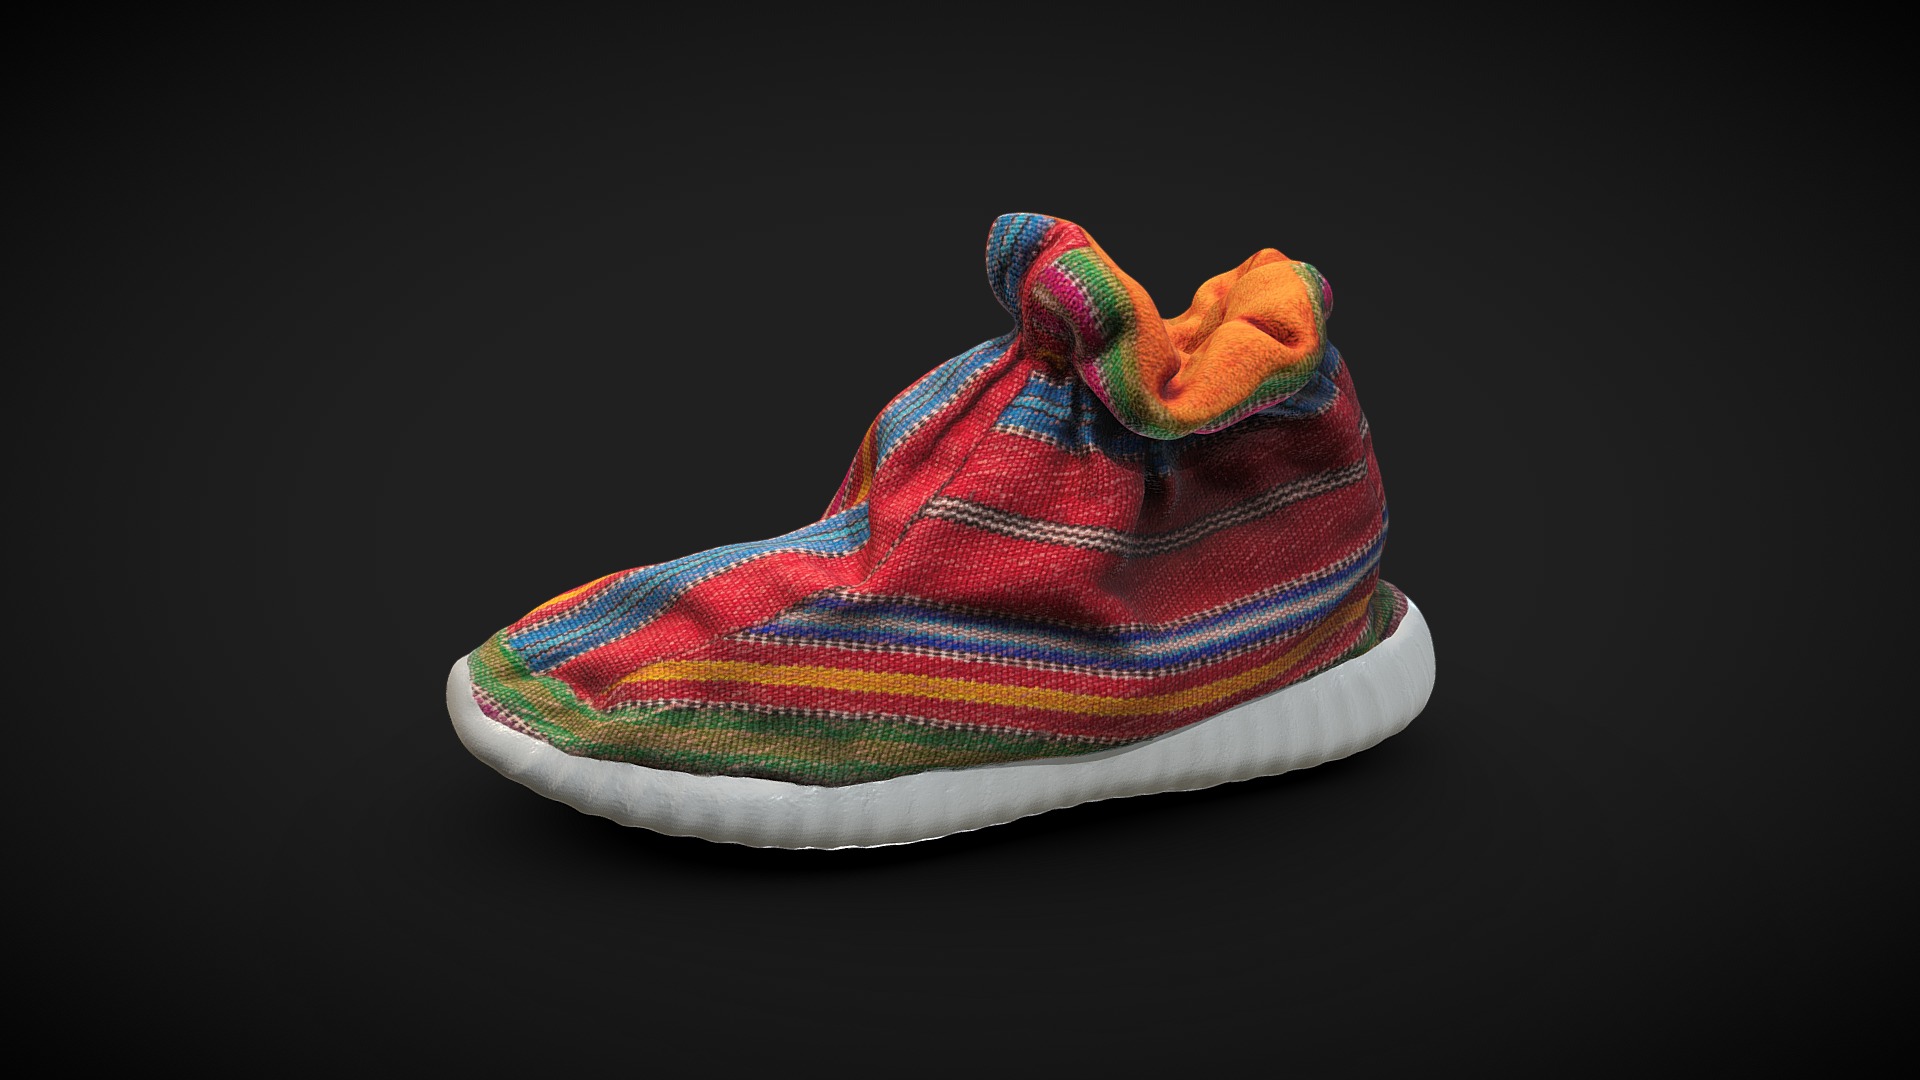 3D model Fabric Shoe Study - This is a 3D model of the Fabric Shoe Study. The 3D model is about a colorful shoe on a black background.